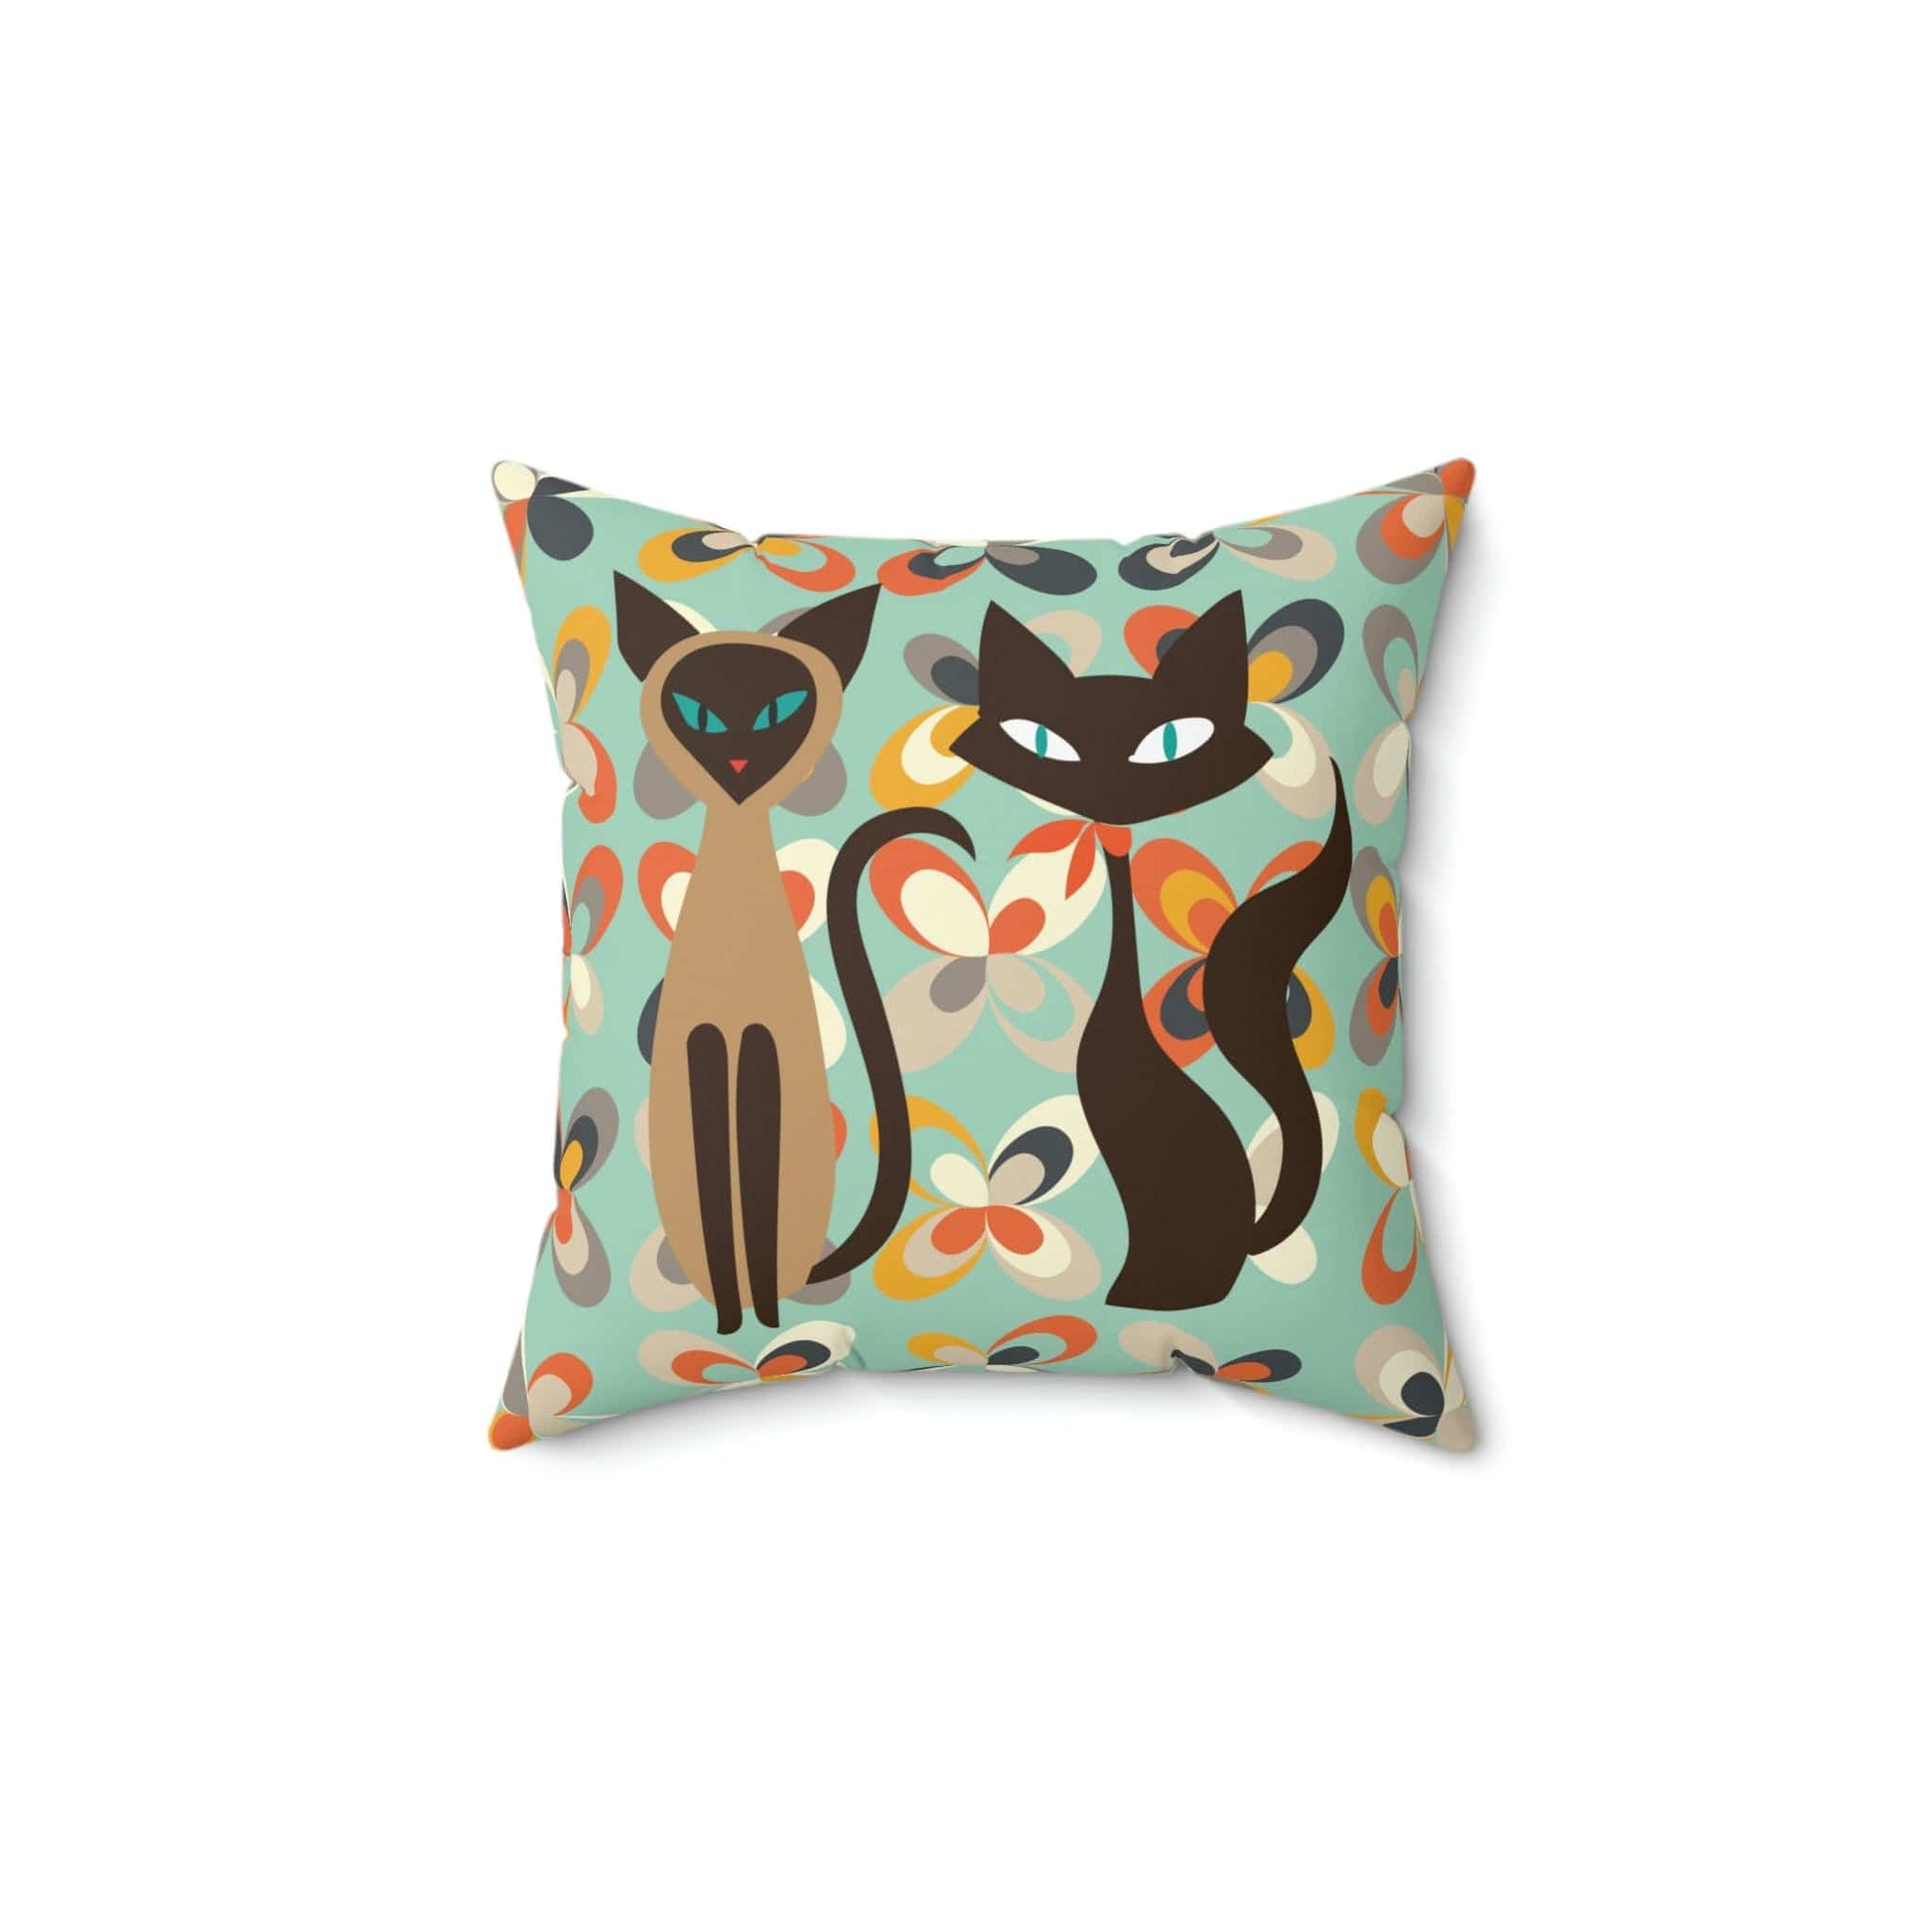 Kate McEnroe New York Mid Century Modern Atomic Cats Retro Suede Pillow Case Faux Suede Throw Pillow Covers